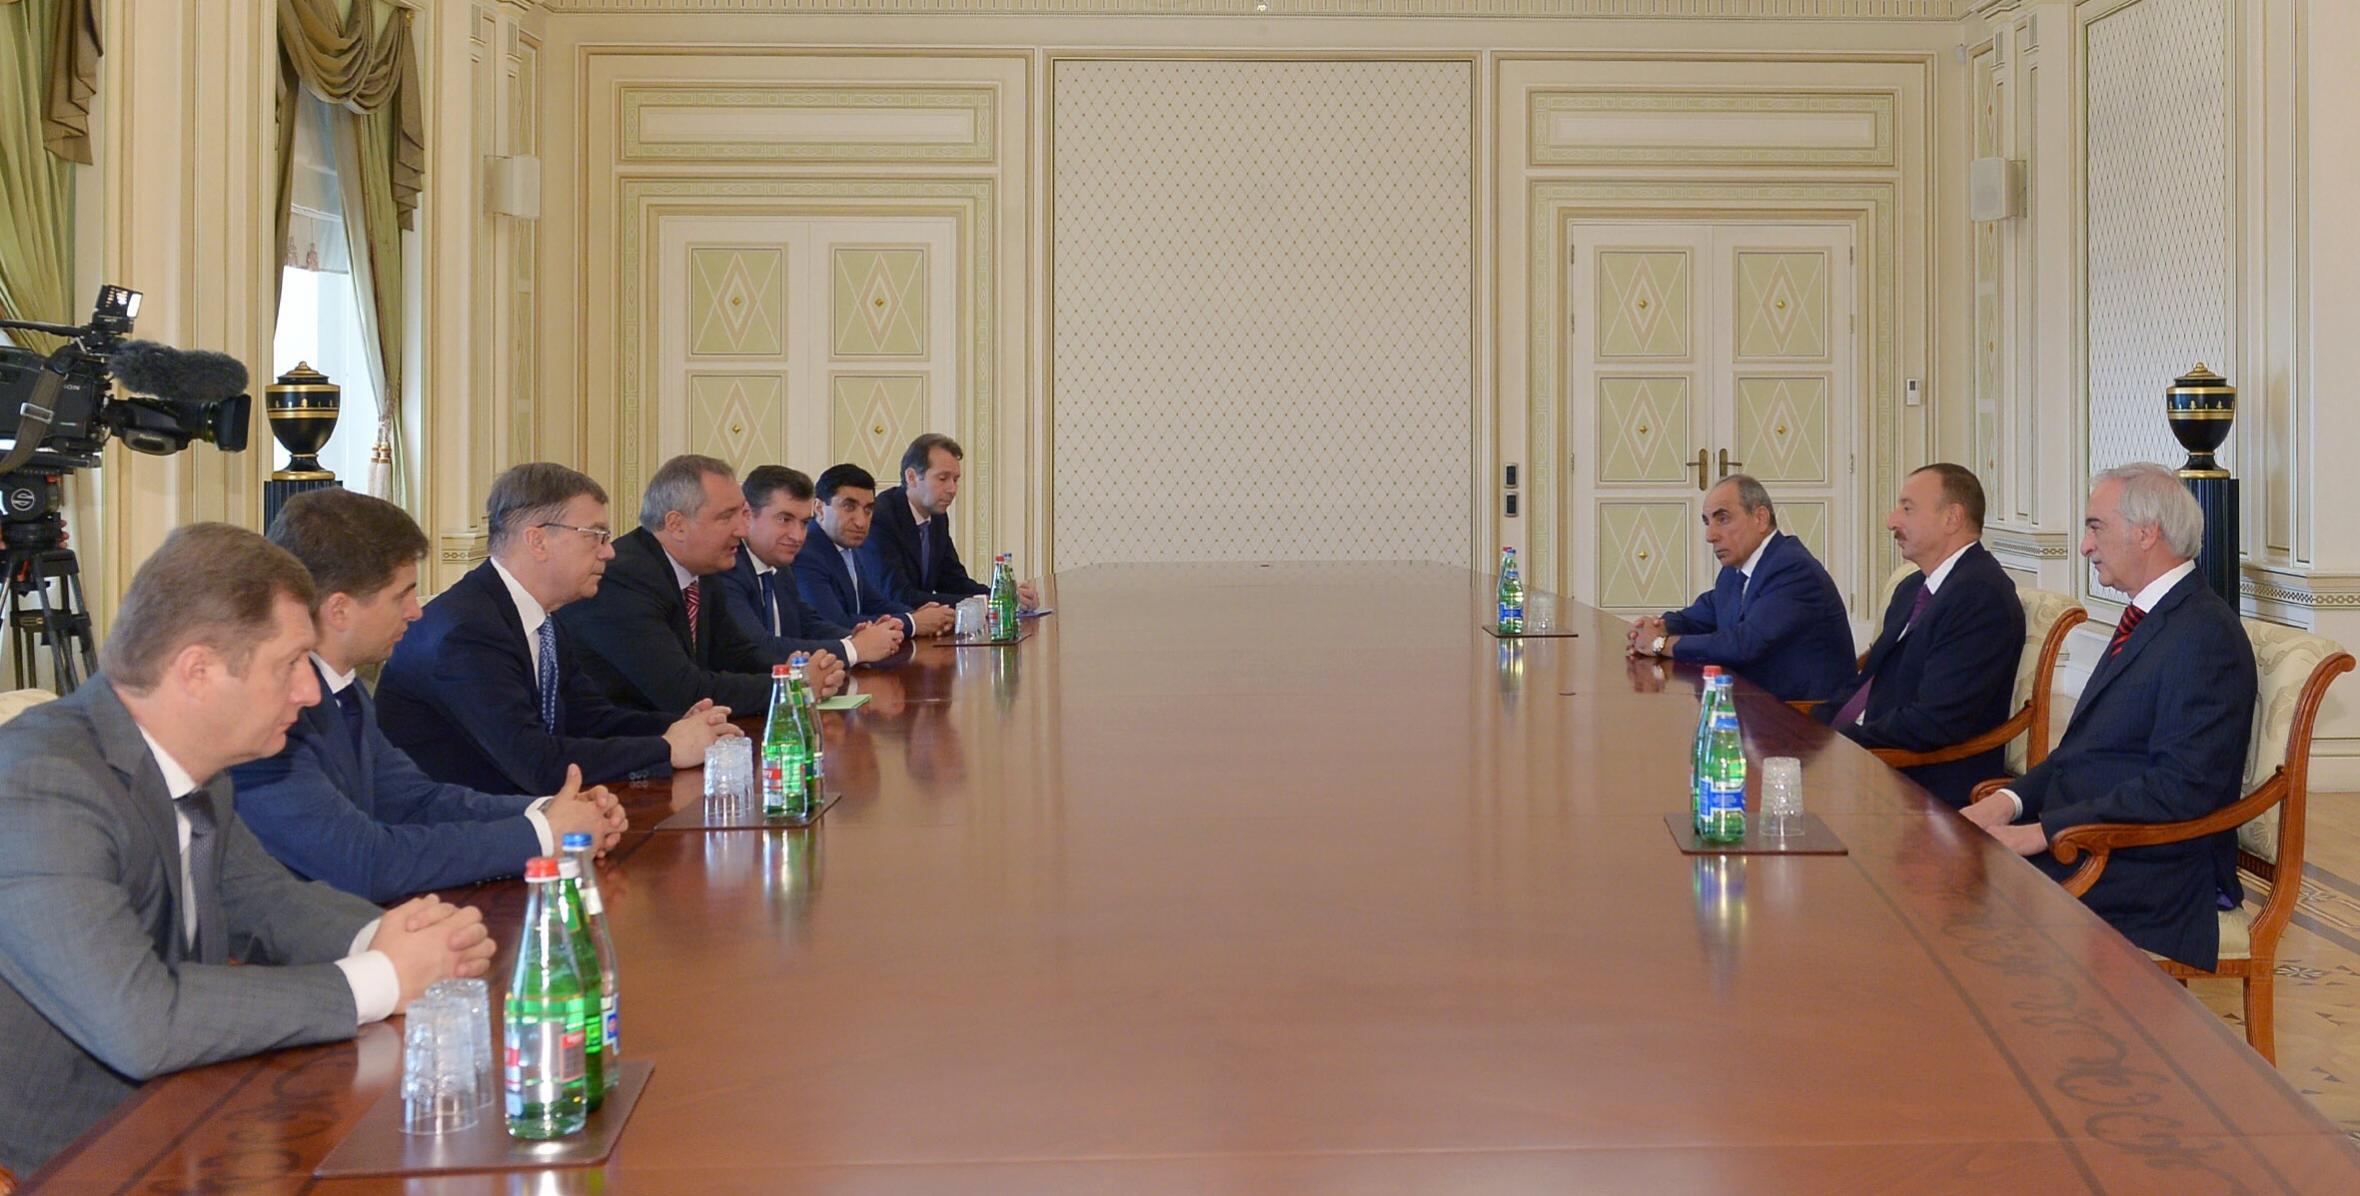 Ilham Aliyev received a delegation led by the deputy head of the Russian Government